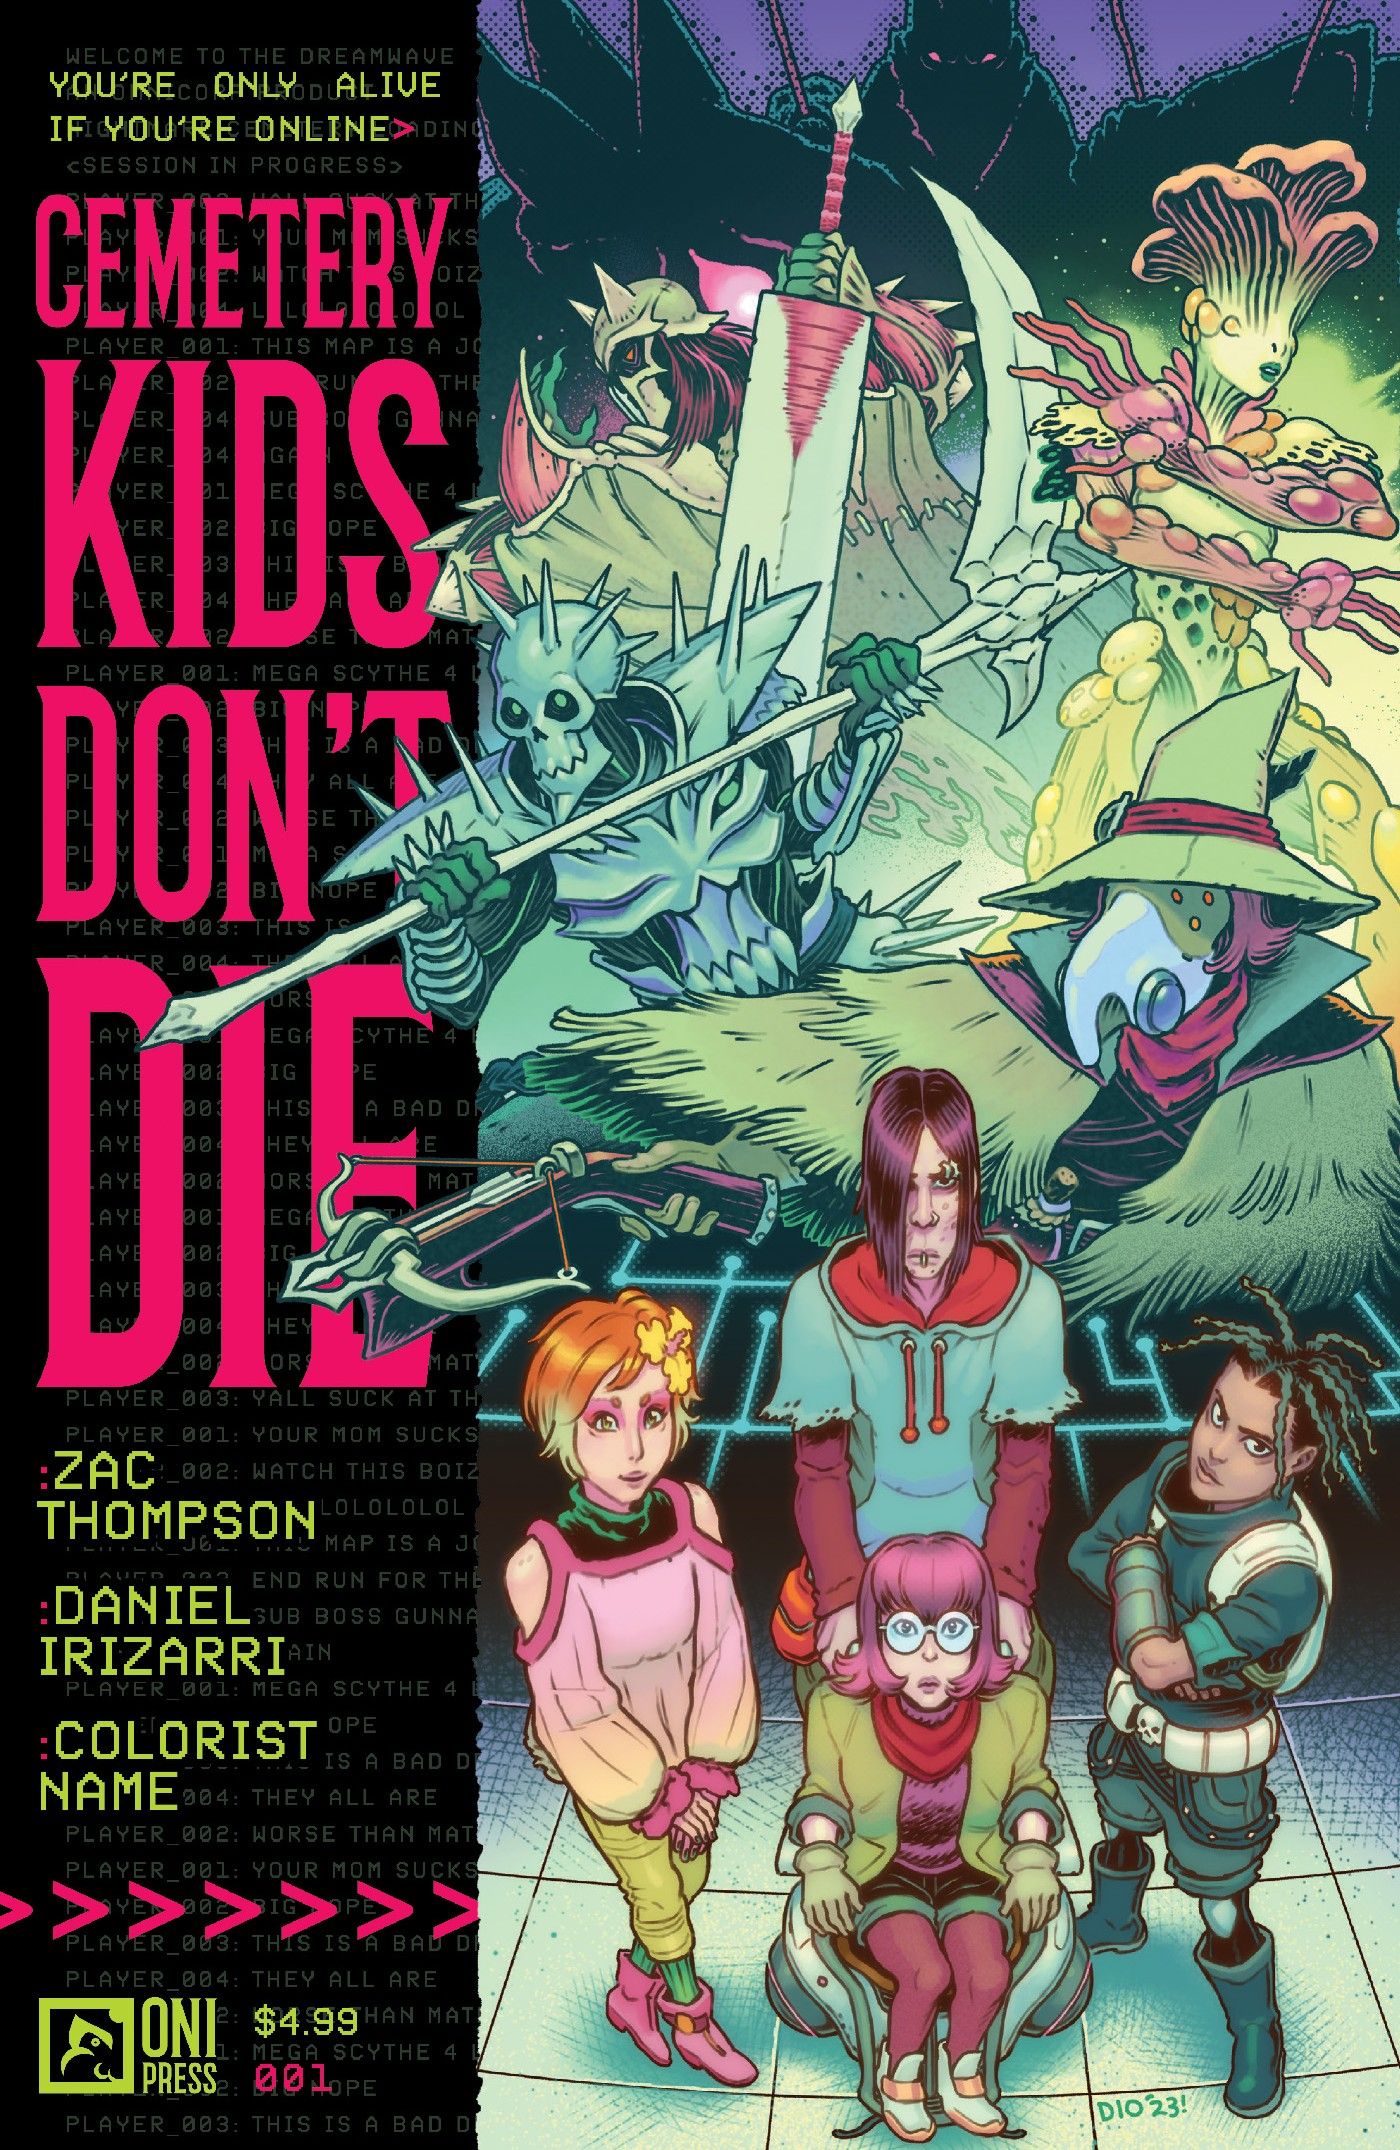 Cemetery Kids Don’t Die #1 Preview Blends RPG Fantasy with Sci-Fi Horror (Exclusive)